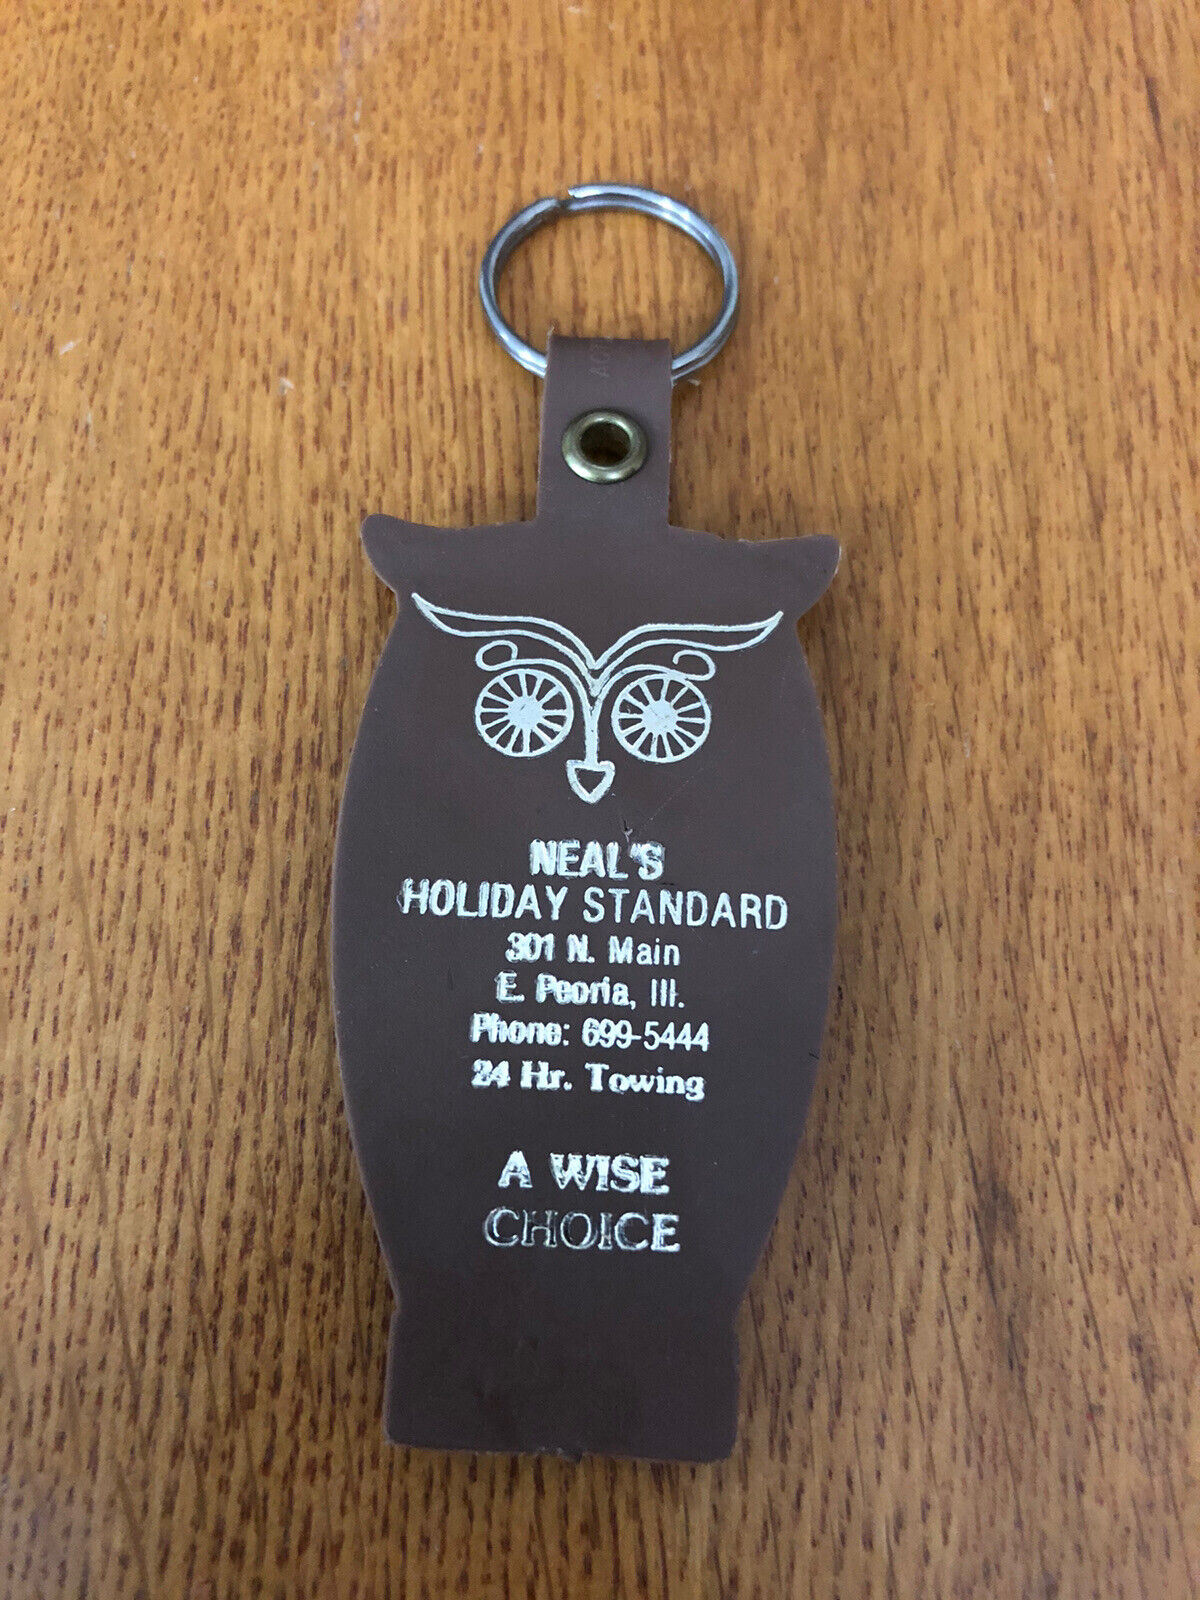 Vintage Neal’s Holiday Standard Gas & Oil Advertising Keychain E. Peoria IL Owl